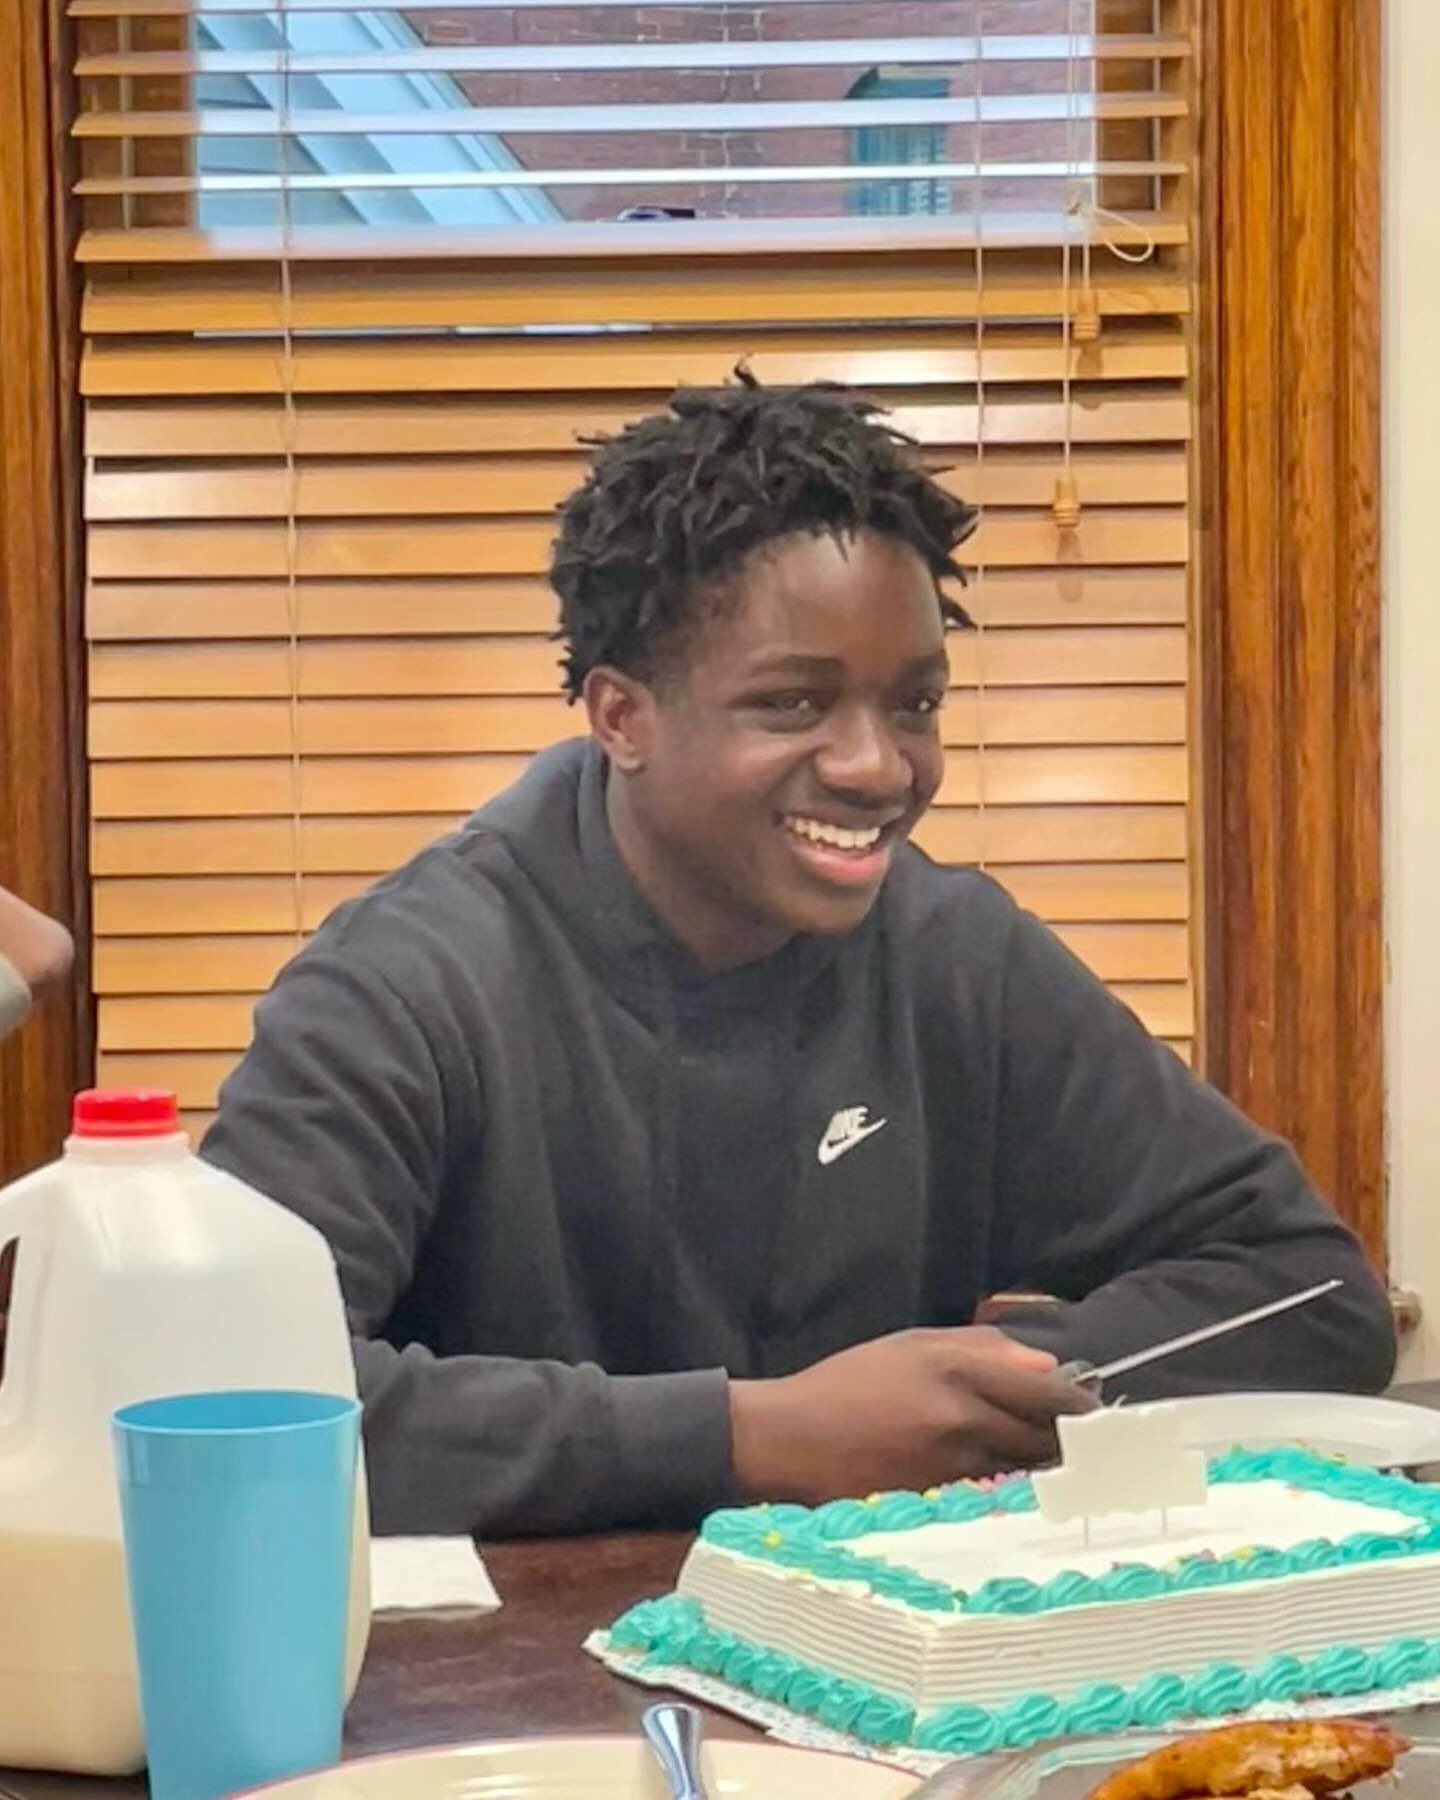 Happy birthday to Tayo! 🥳 Wishing you a great year ahead! 

And happy spring break to all the scholars! Enjoy! ☀️💐